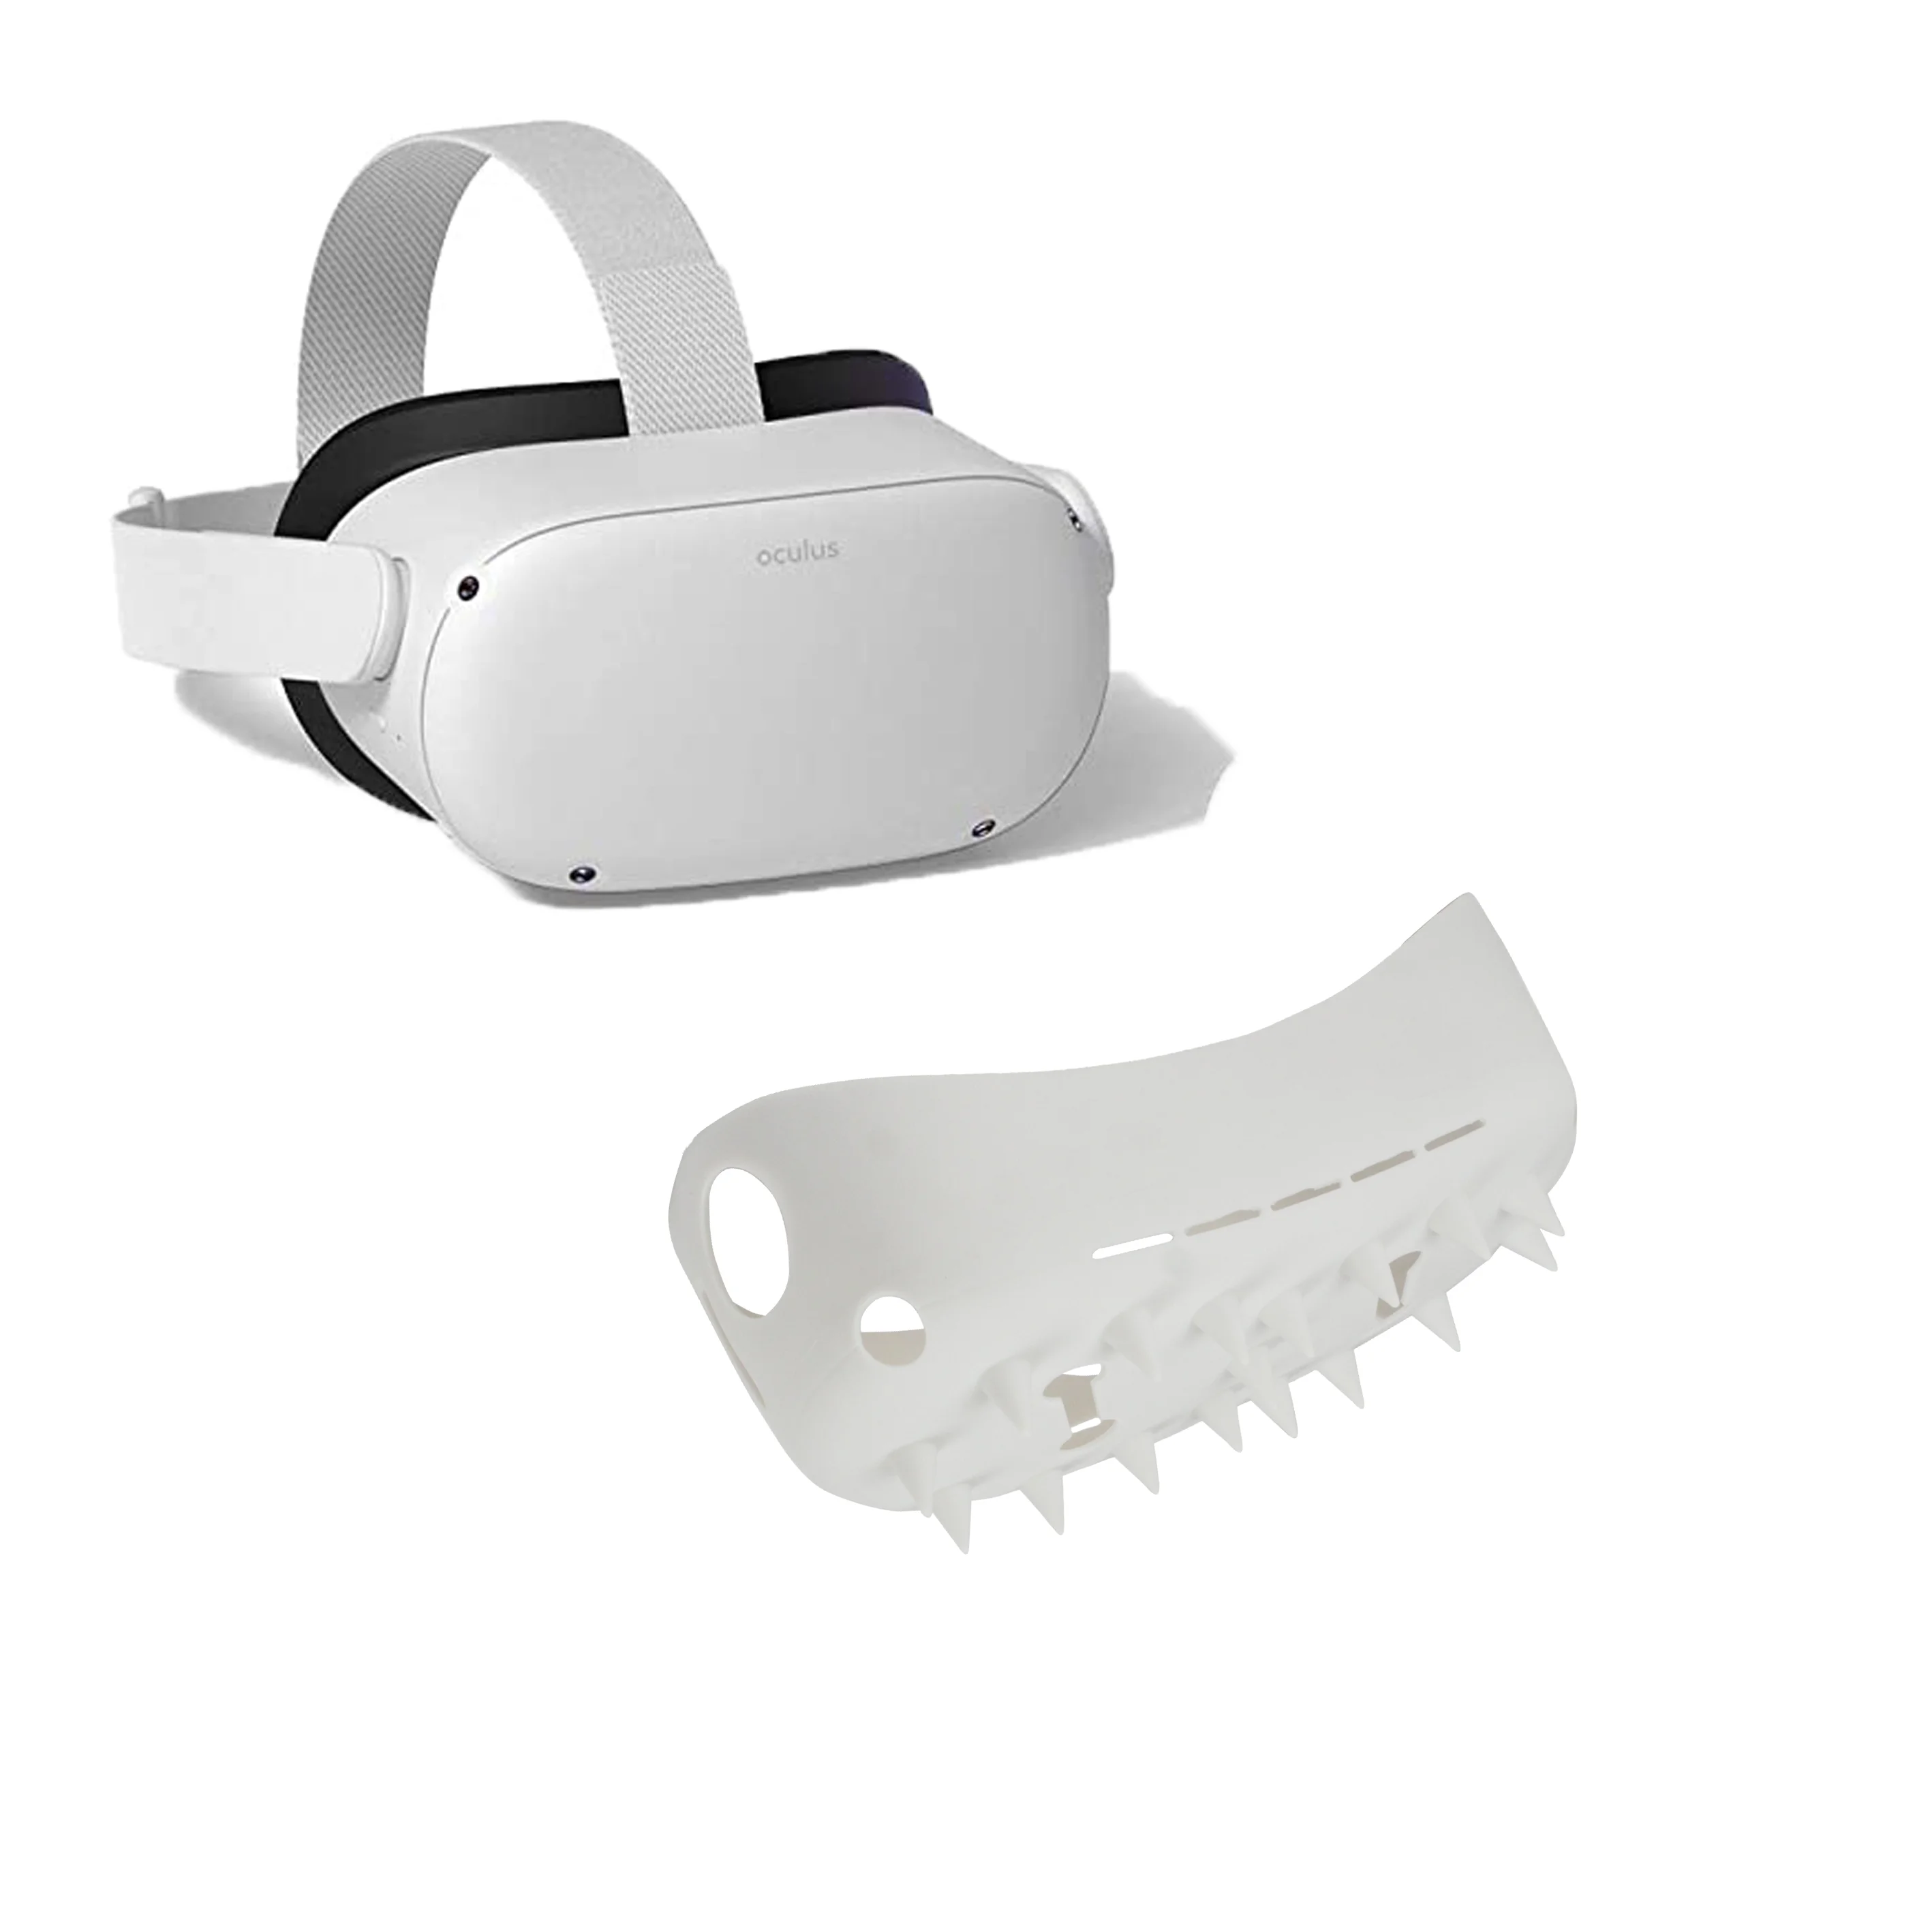 baan Defecte Redelijk Suitable For Oculus Quest 2 Vr Headset Shell Protects The Skin-the Front  Cover Protects The Camera And Port - Buy Oculus Quest 2,Quest 2,Oculus  Quest 2 Accessories Product on Alibaba.com